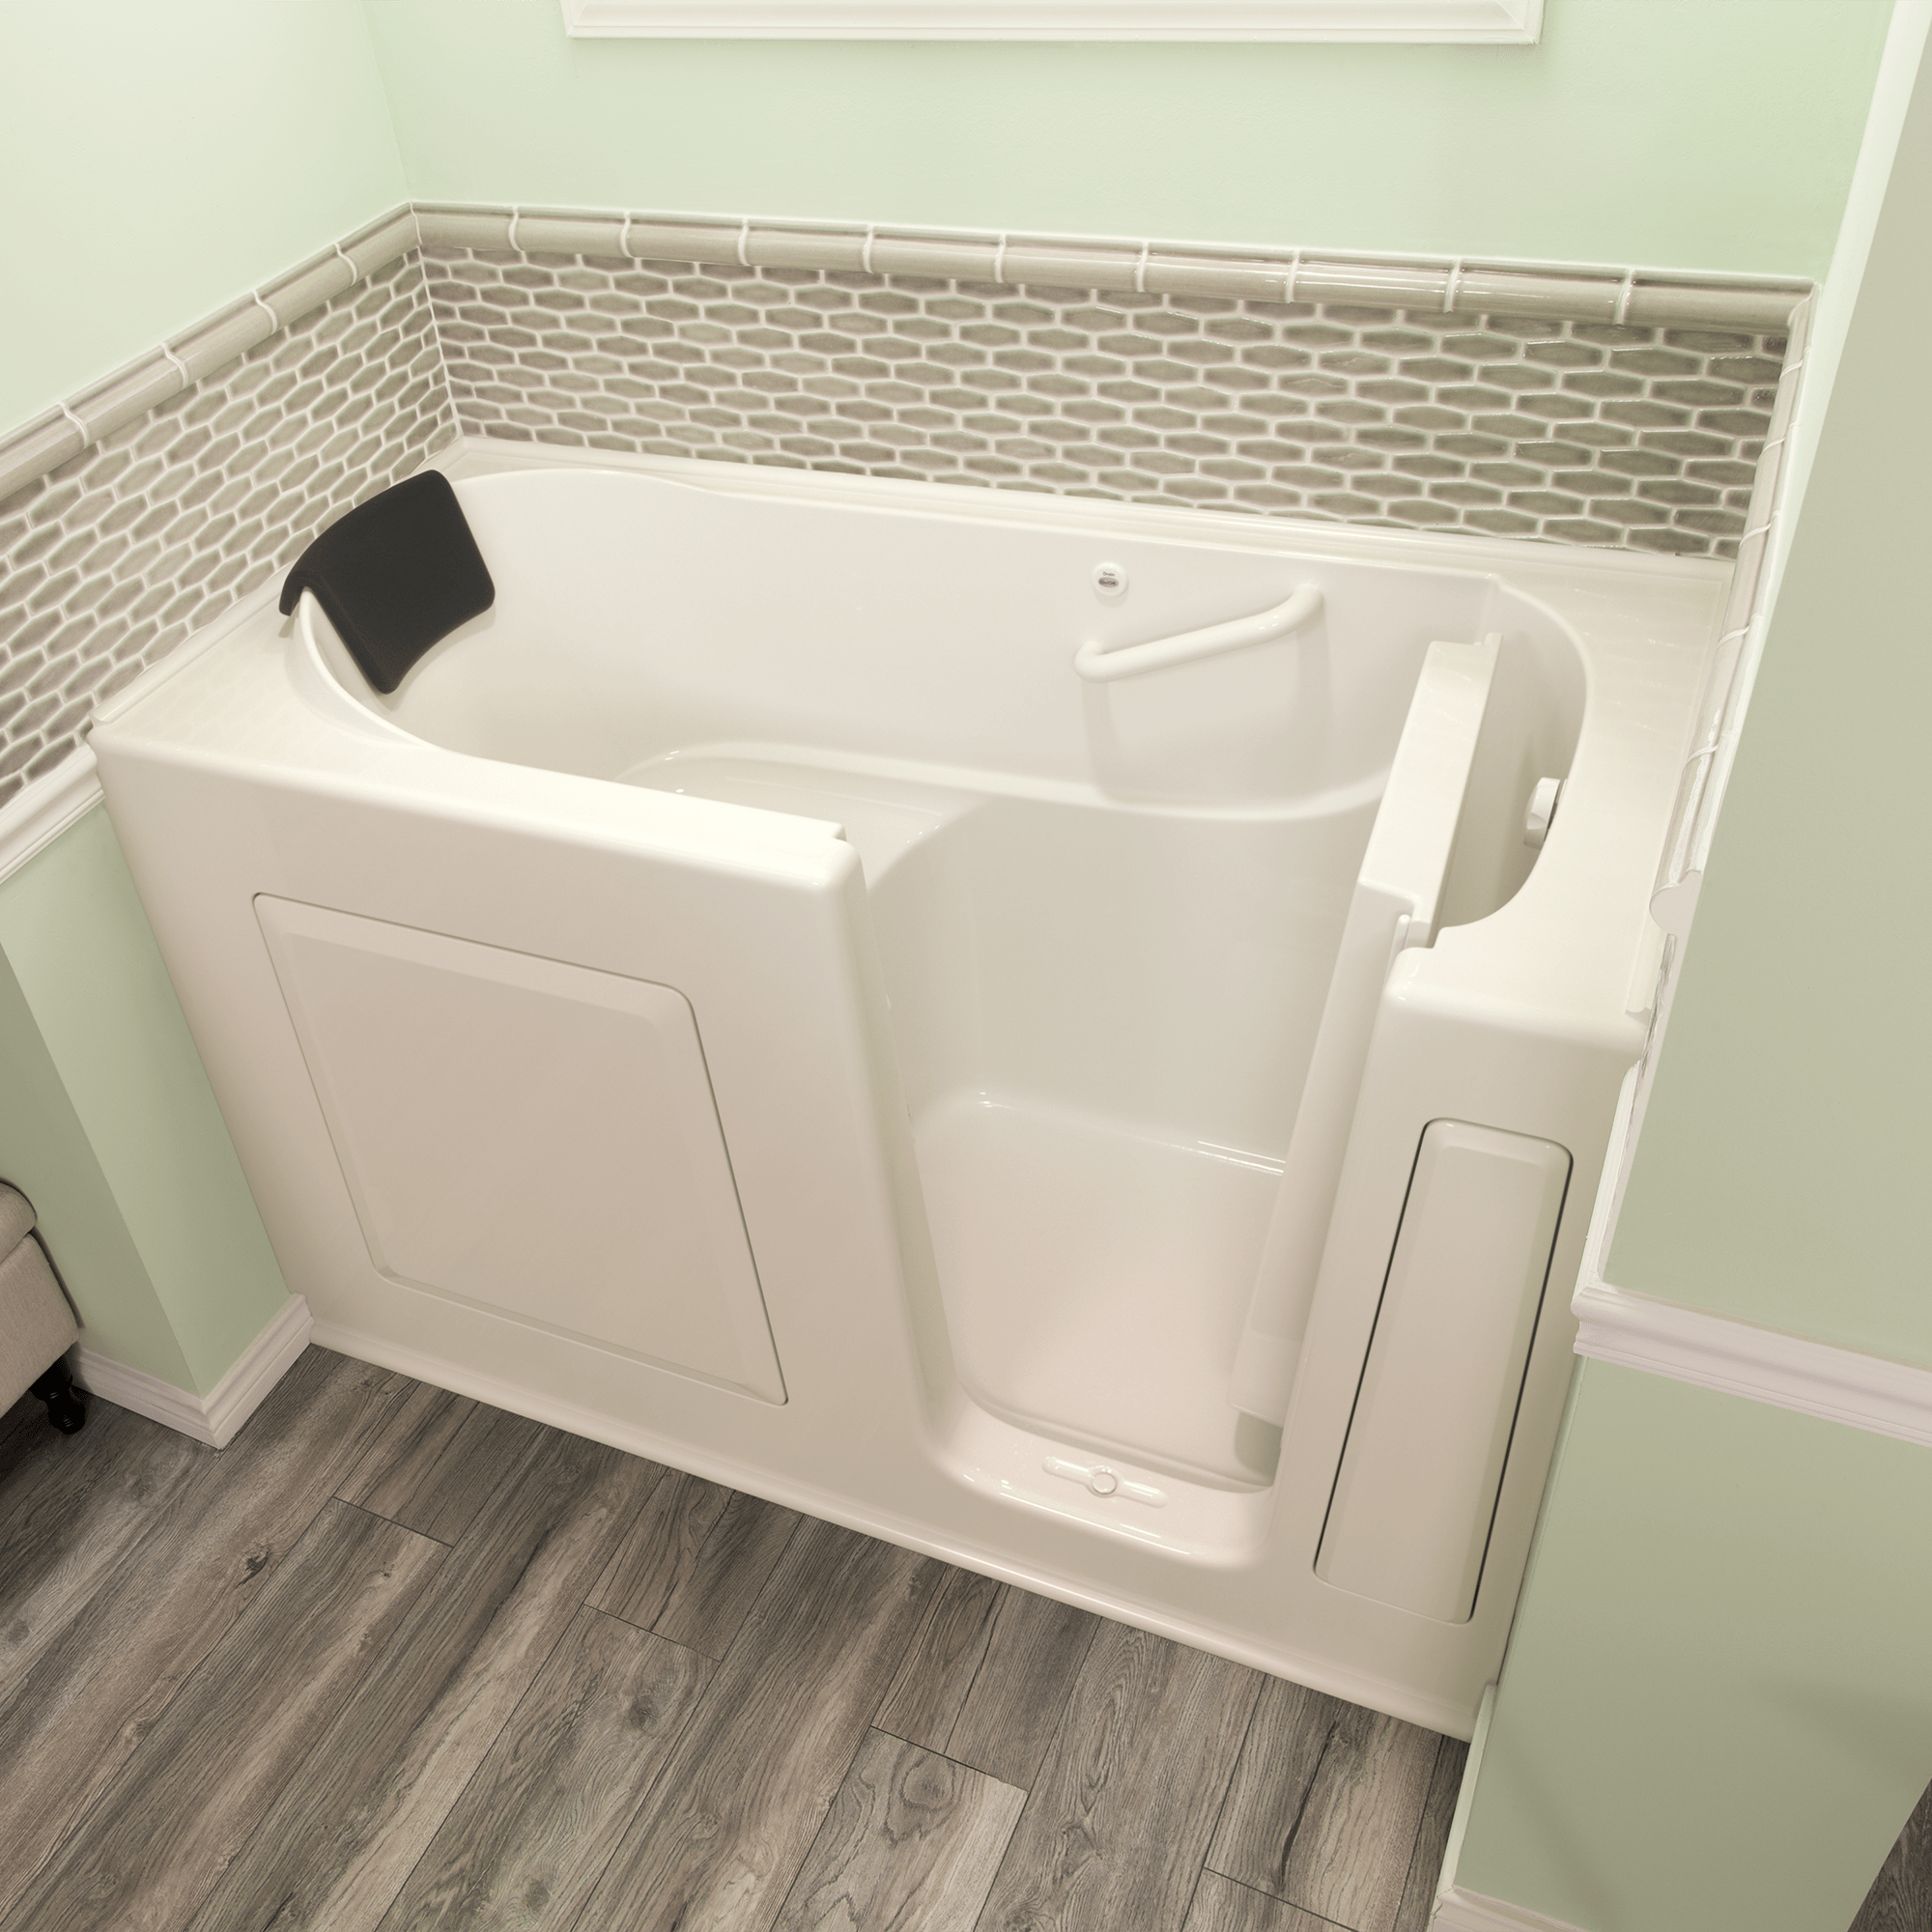 Gelcoat Premium Series 30 x 60 -Inch Walk-in Tub With Soaker System - Right-Hand Drain